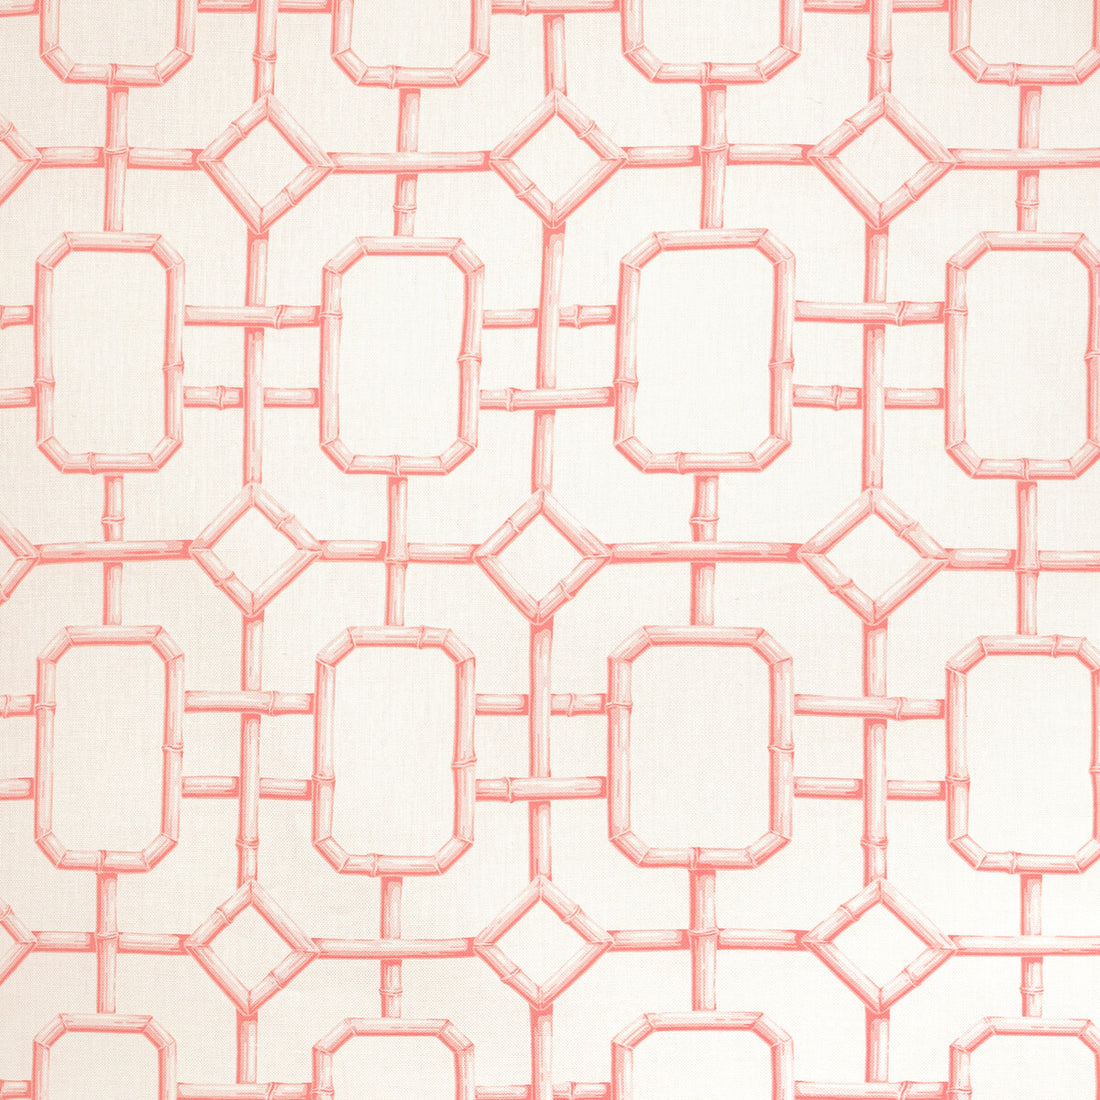 Bambu Fret fabric in coral color - pattern BAMBU FRET.719.0 - by Kravet Couture in the Jan Showers Charmant collection